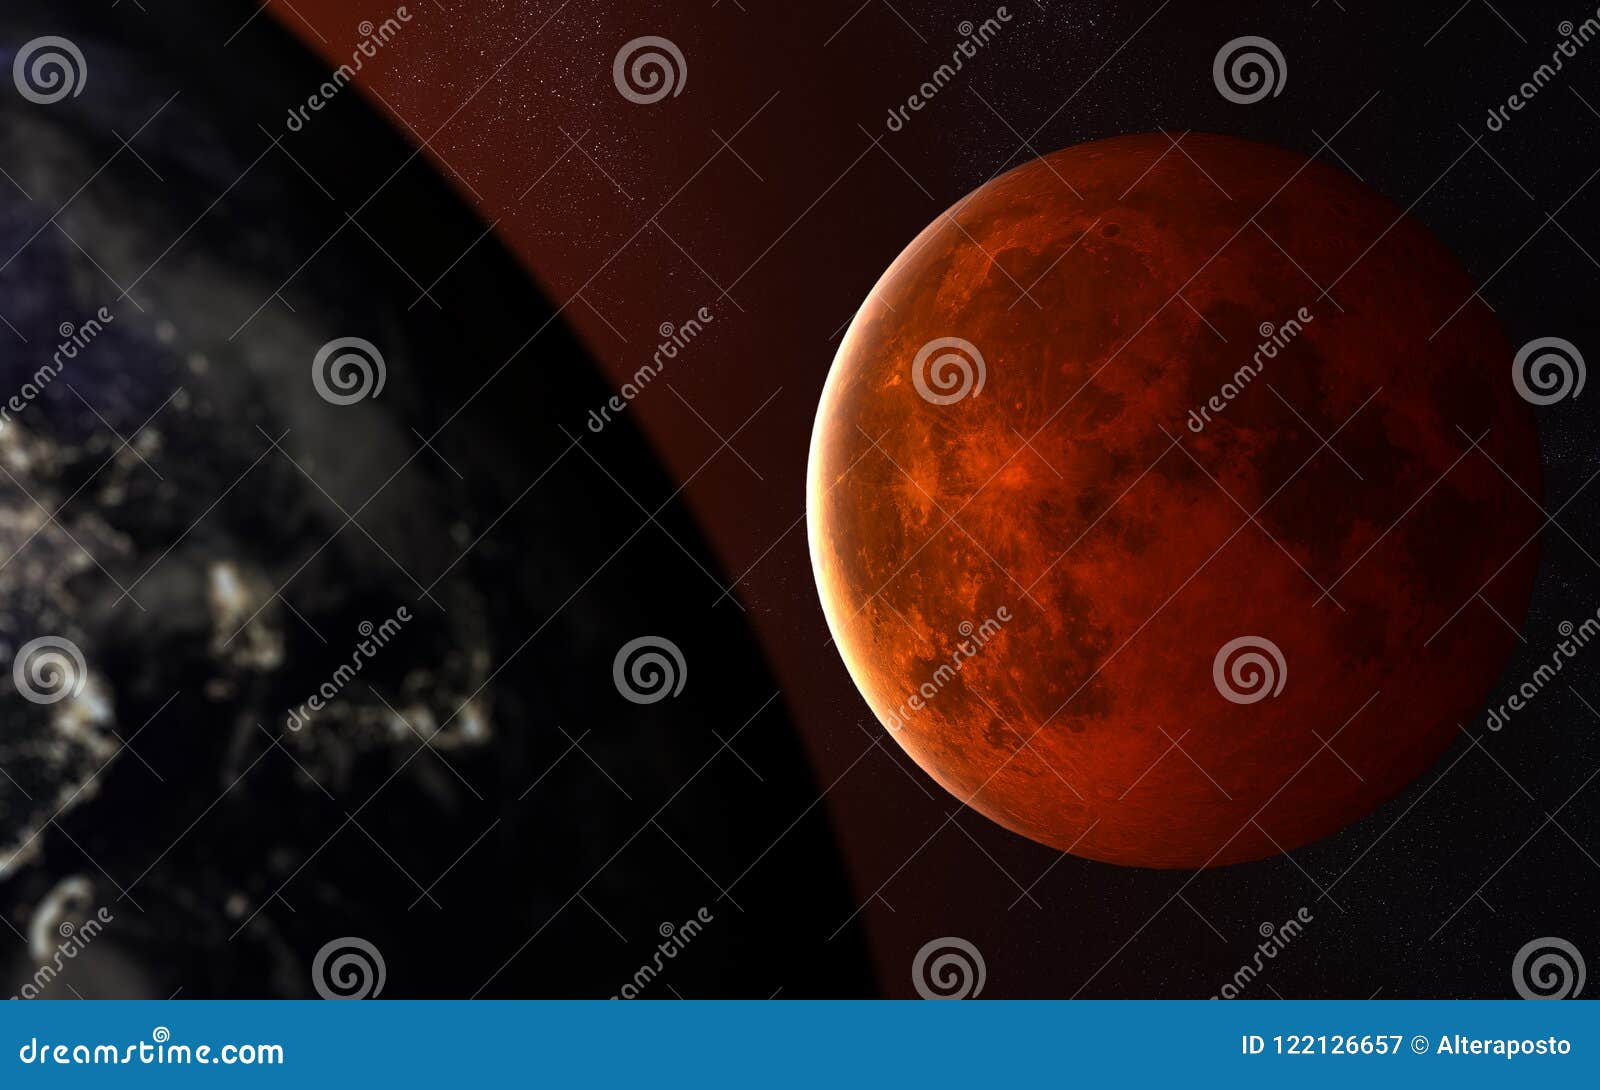 Red Moon Behind The Planet Earth Solar System Elements Of The